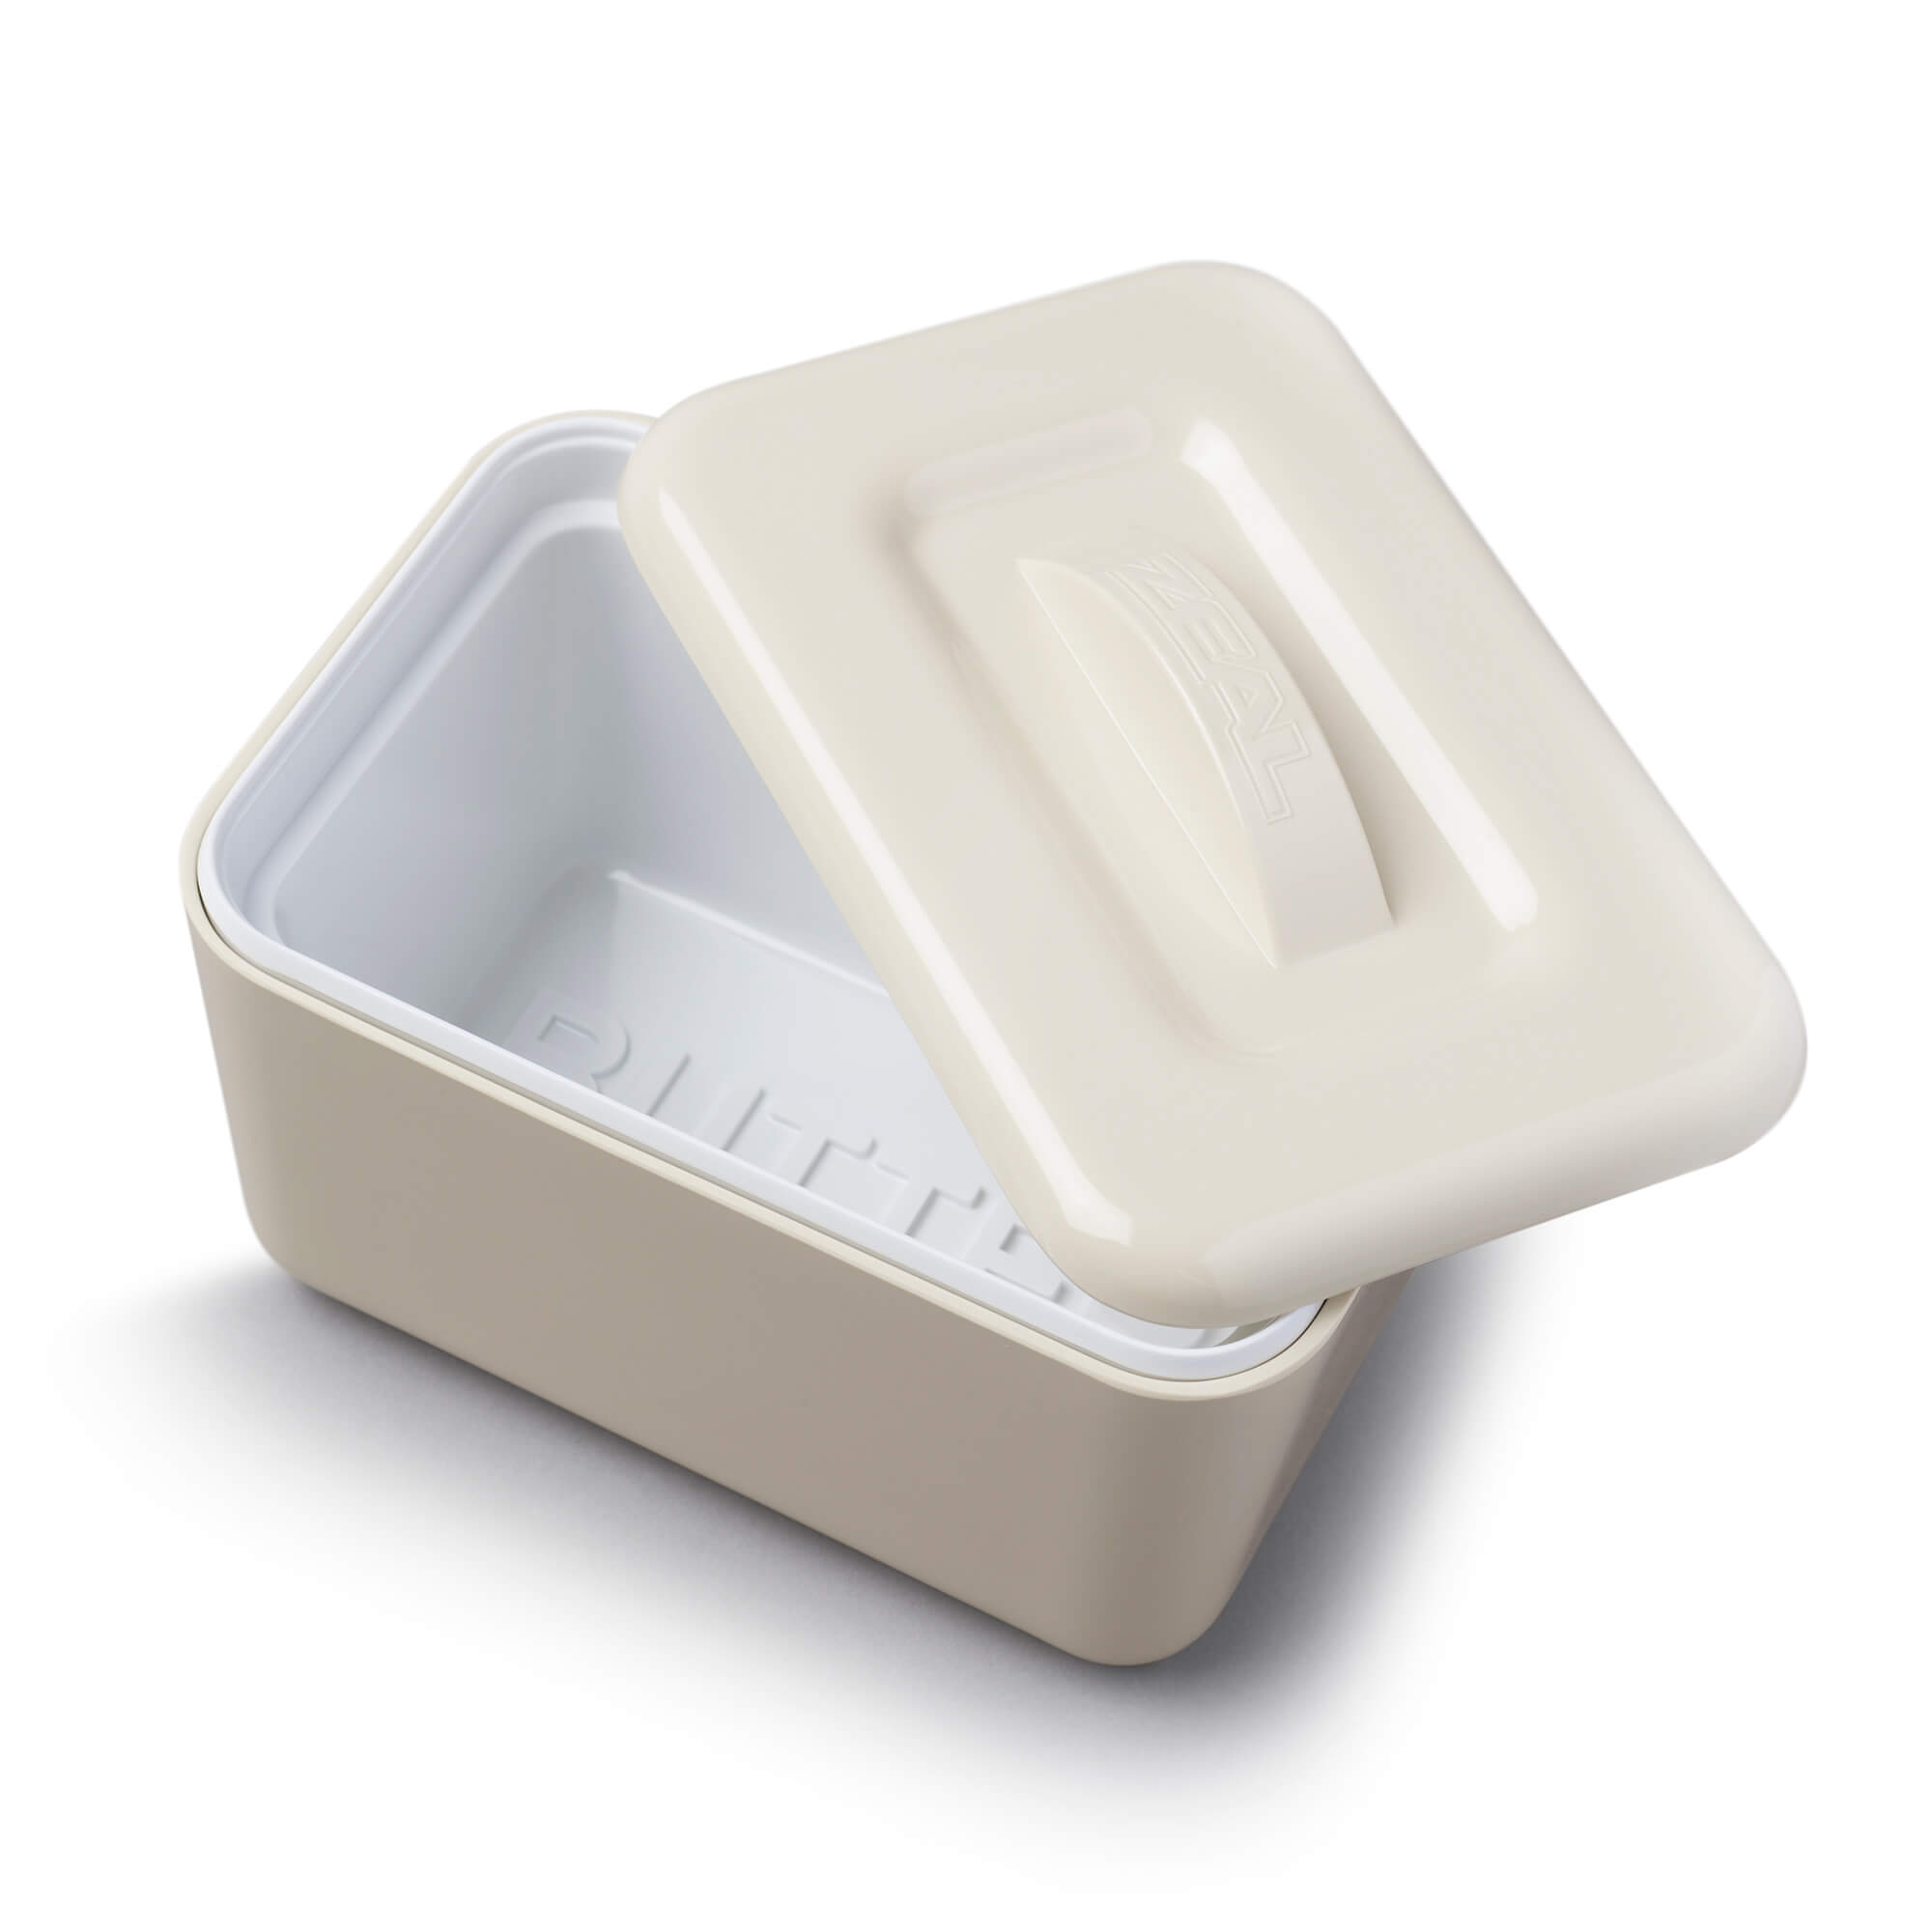 Inside of Cream Melamine Butter Dish by Zeal